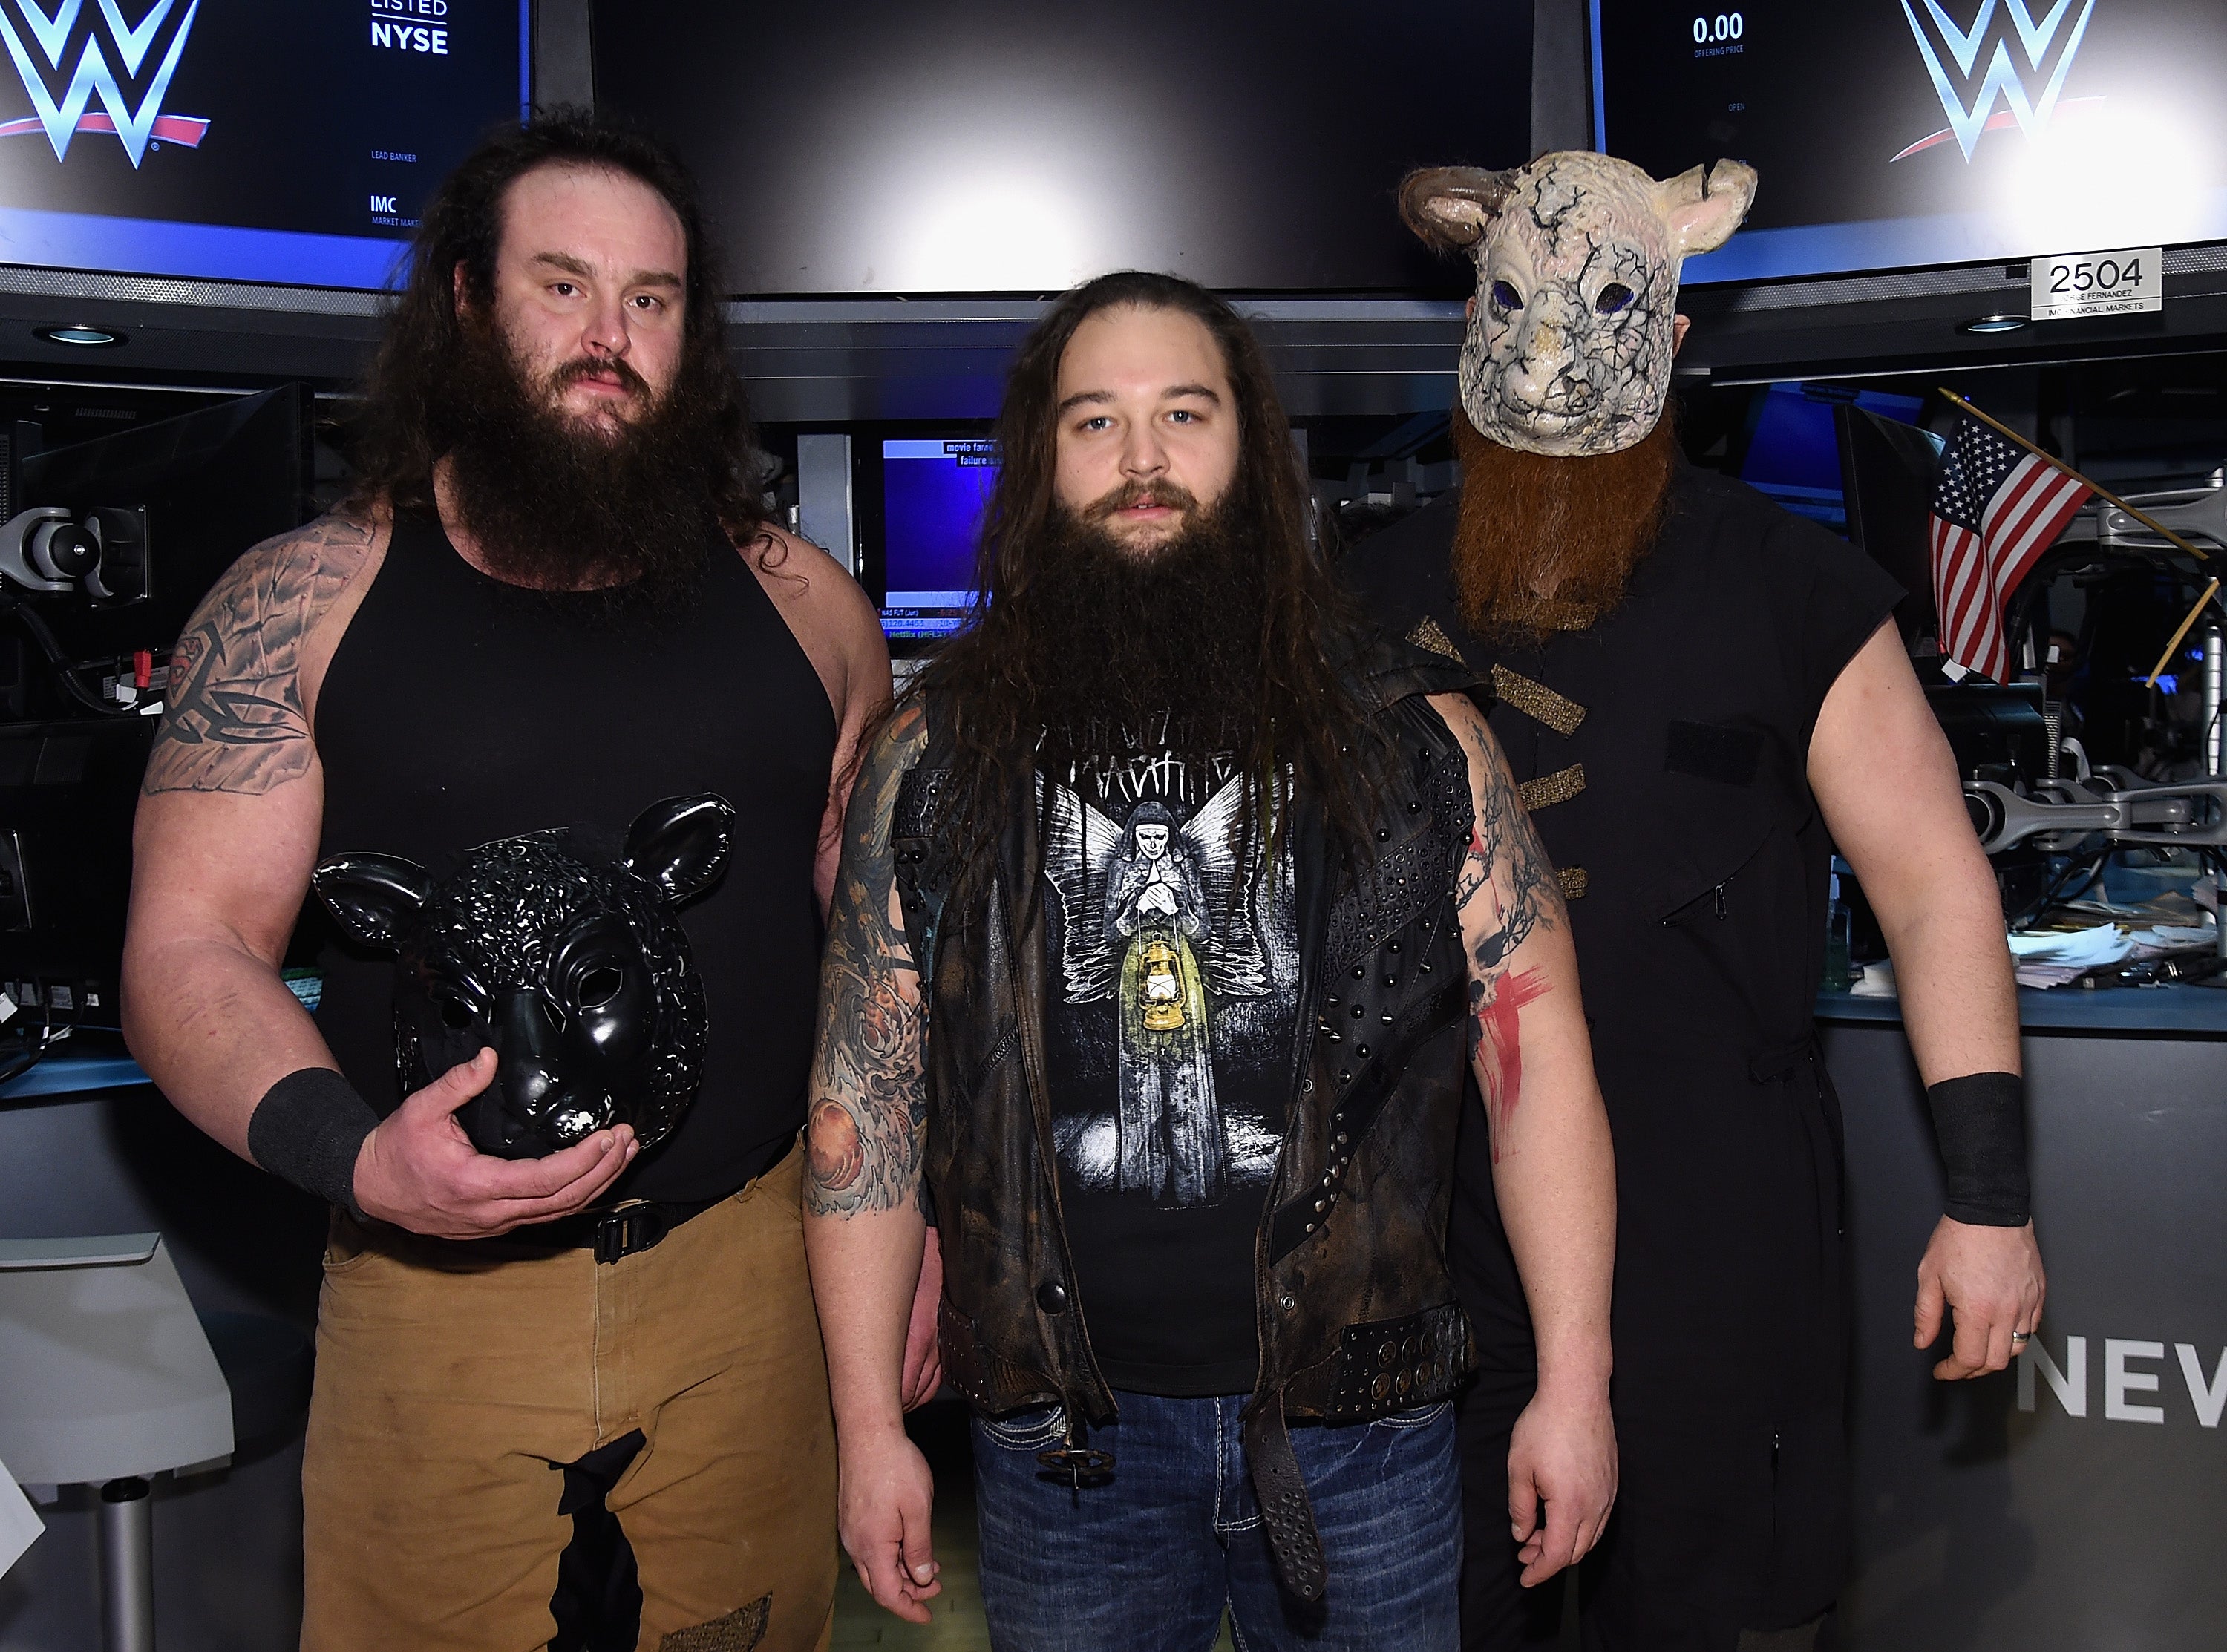 Find Out What Happened Between Bray Wyatt & LA Knight On SmackDown